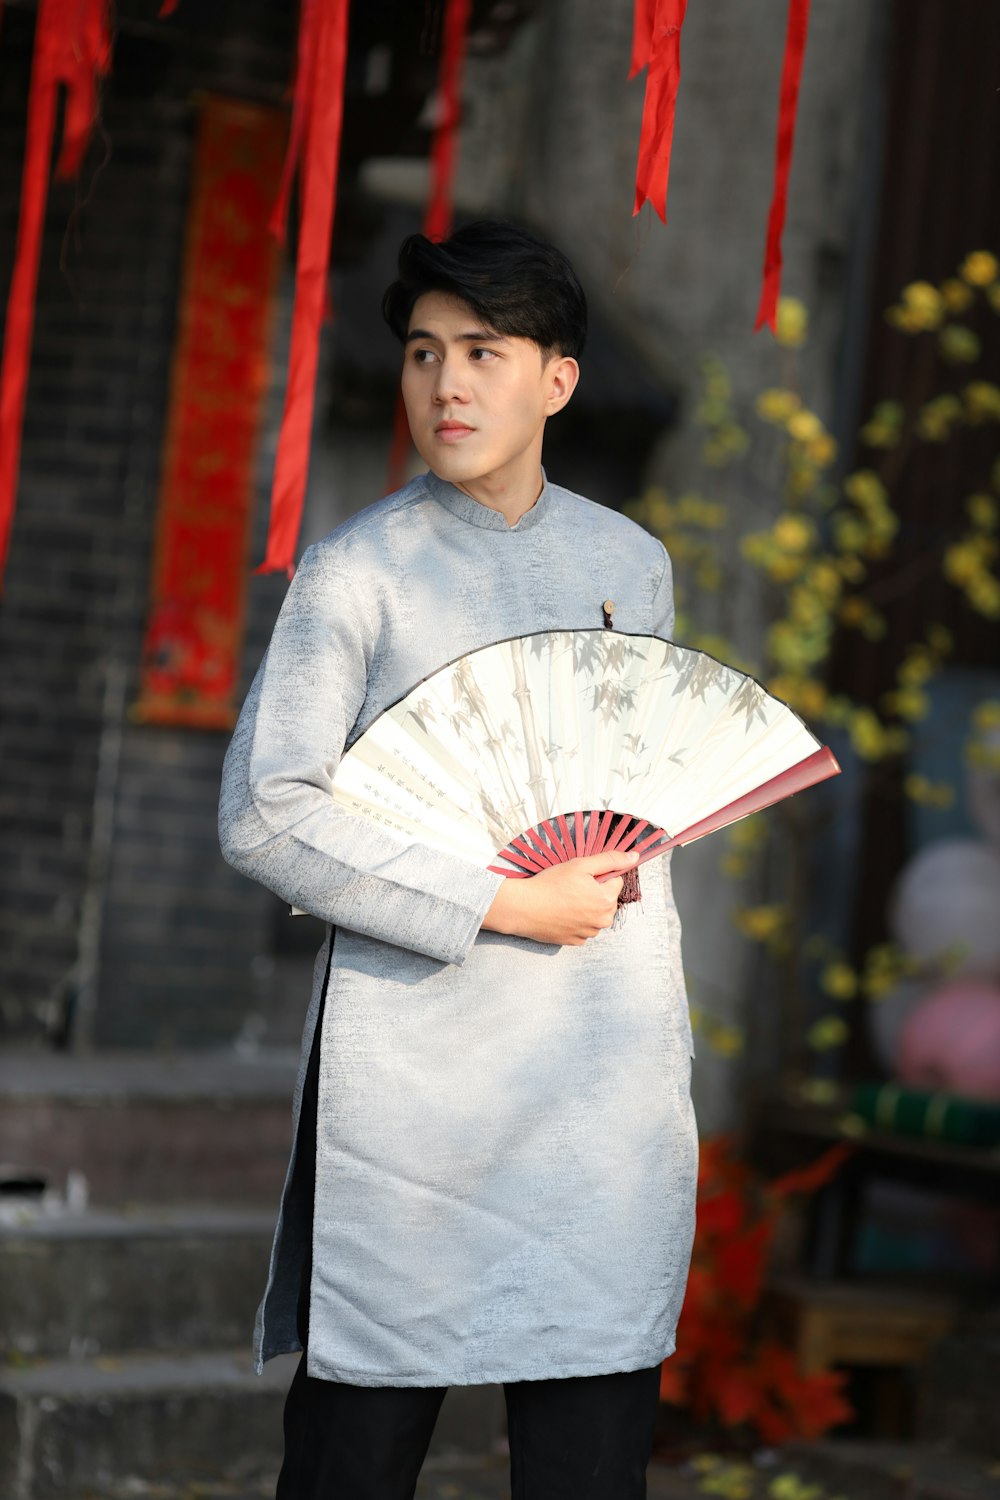 a man holding a fan standing in front of a building